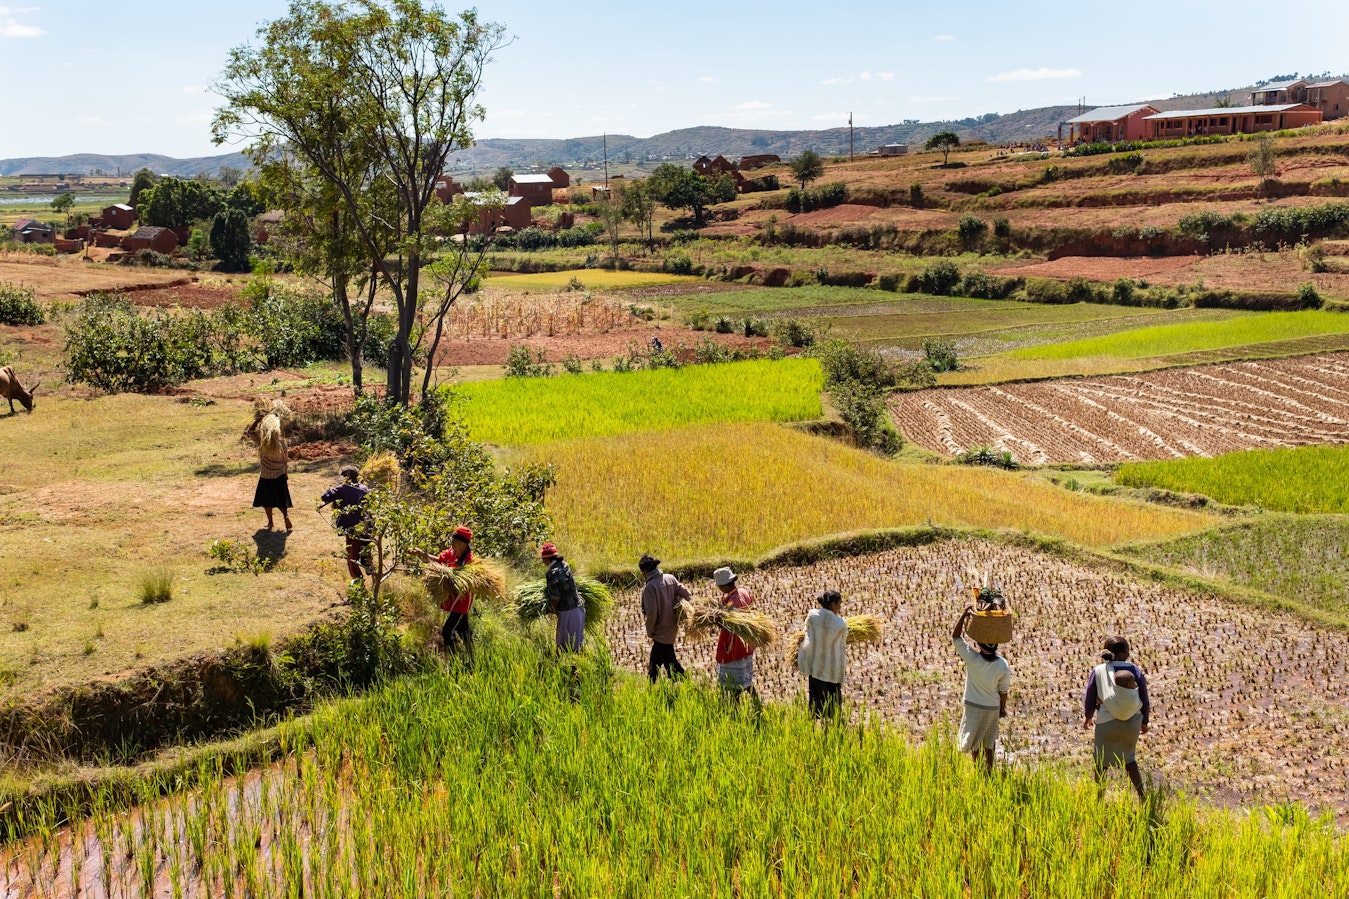 In Madagascar, since 2005, the Network has helped 80,000 rice farmers to produce crops of better quality, in less time and with less labour. In many areas, crop yields have tripled, and families no longer have to deal with chronic hunger.